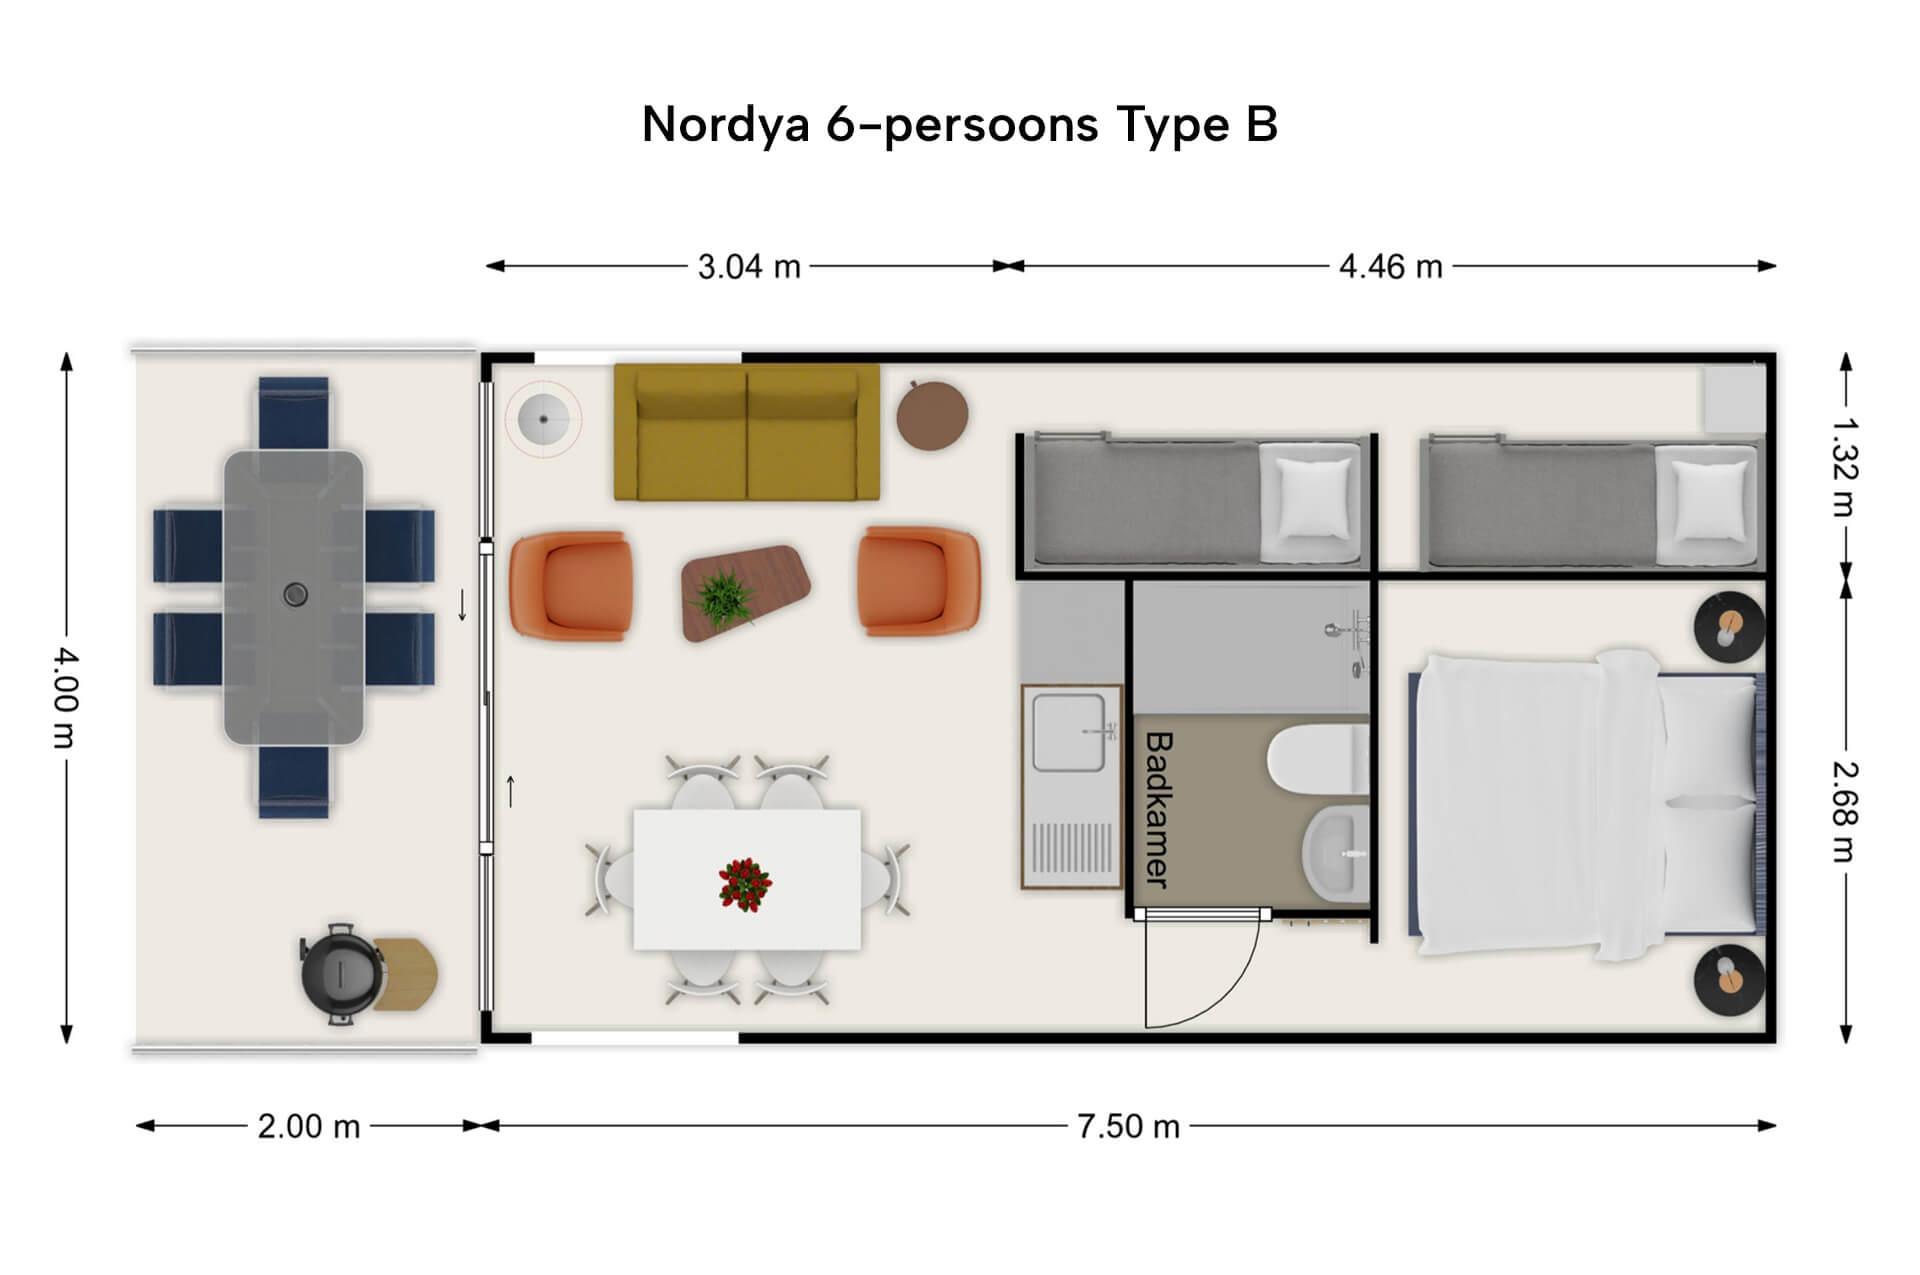 Nordya 6-persoons Type-A